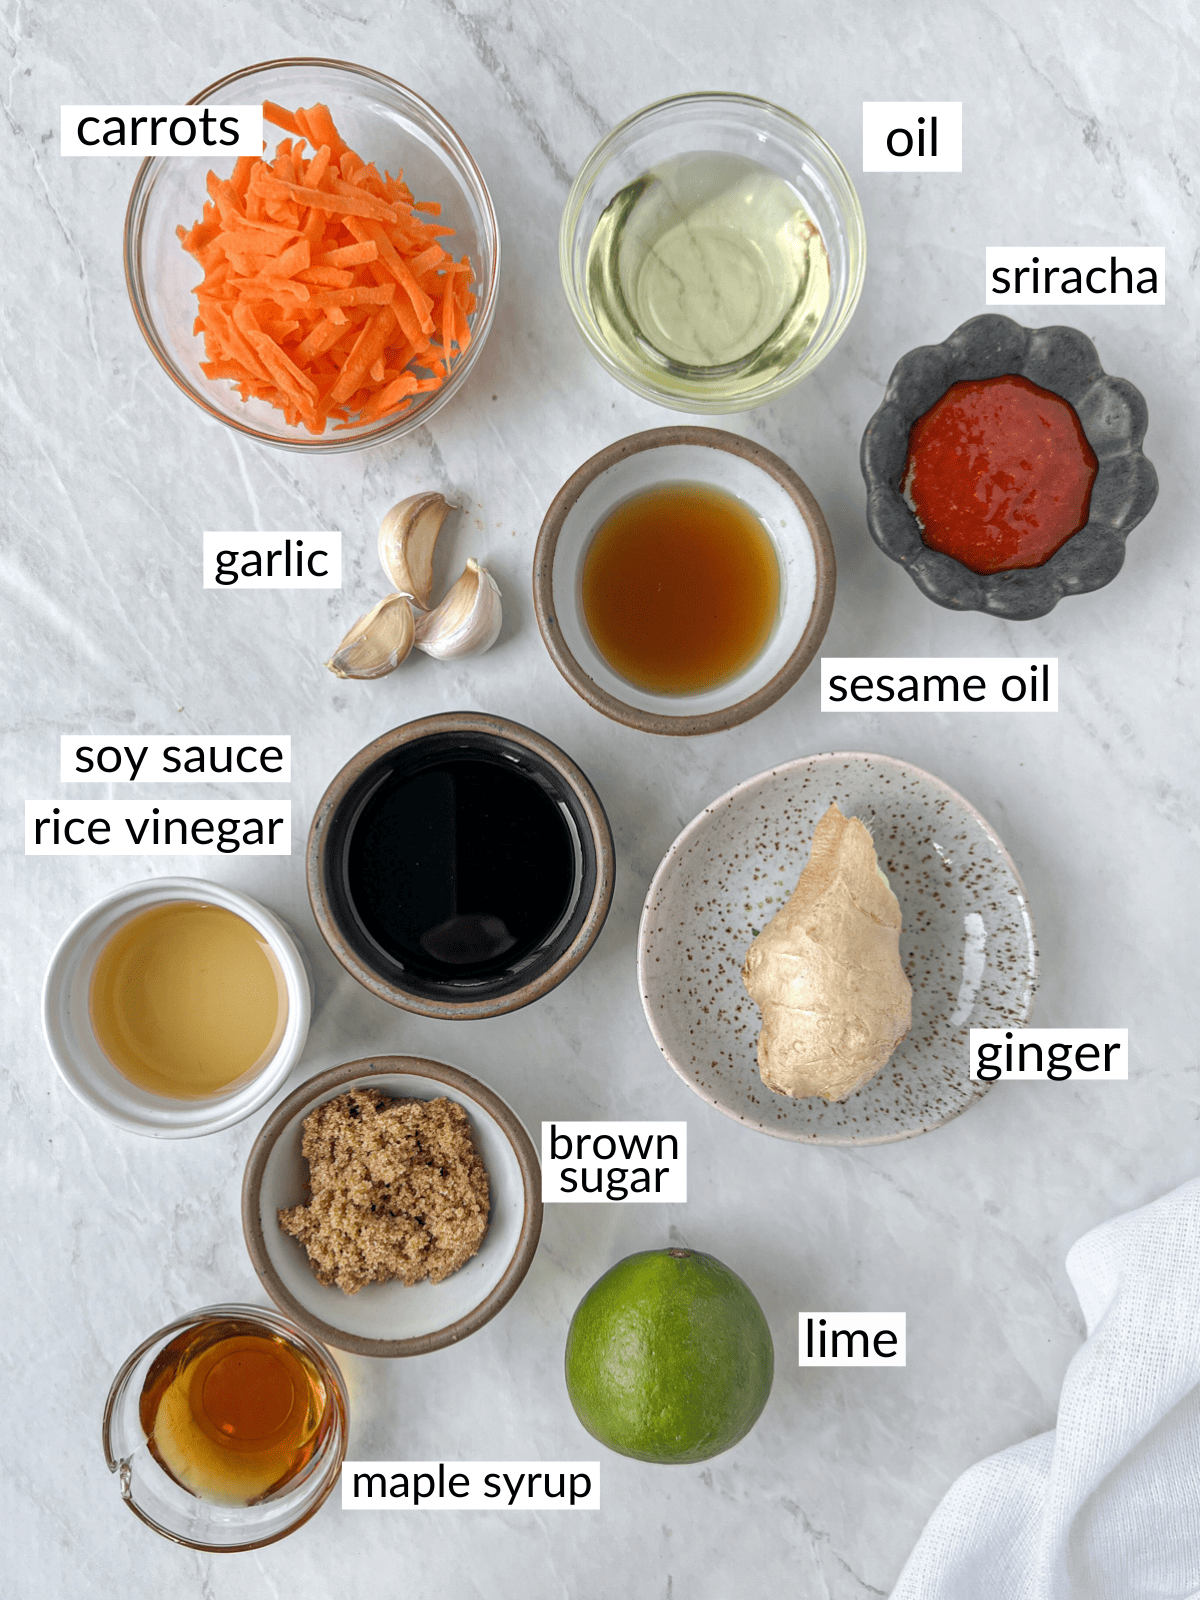 Small bowls filled with ingredients to make a dairy-free Asian slaw dressing.